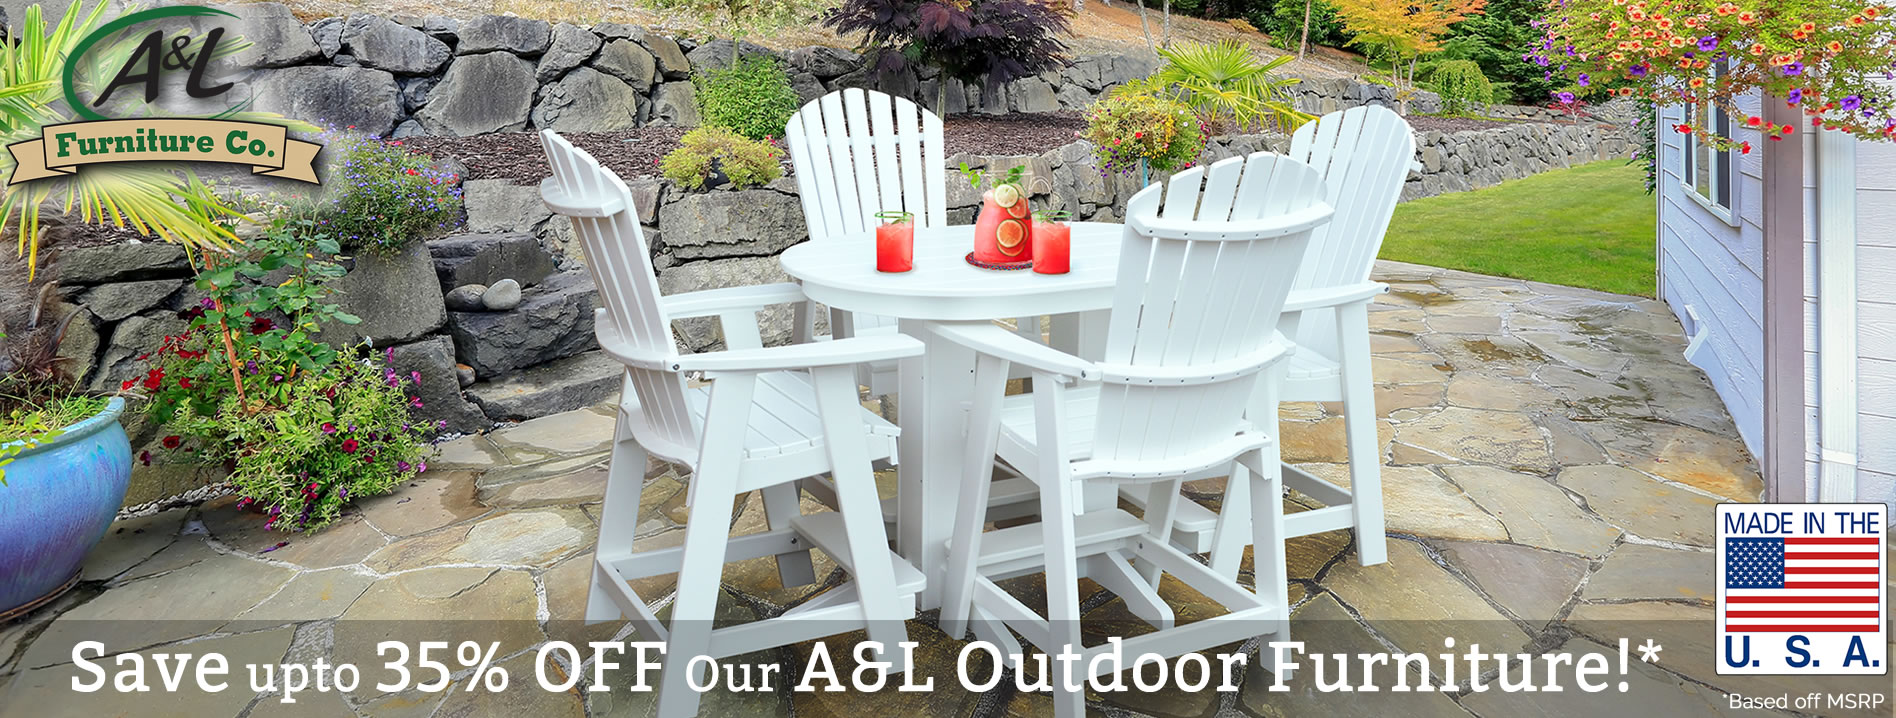 Sale on A&L Outdoor Furniture